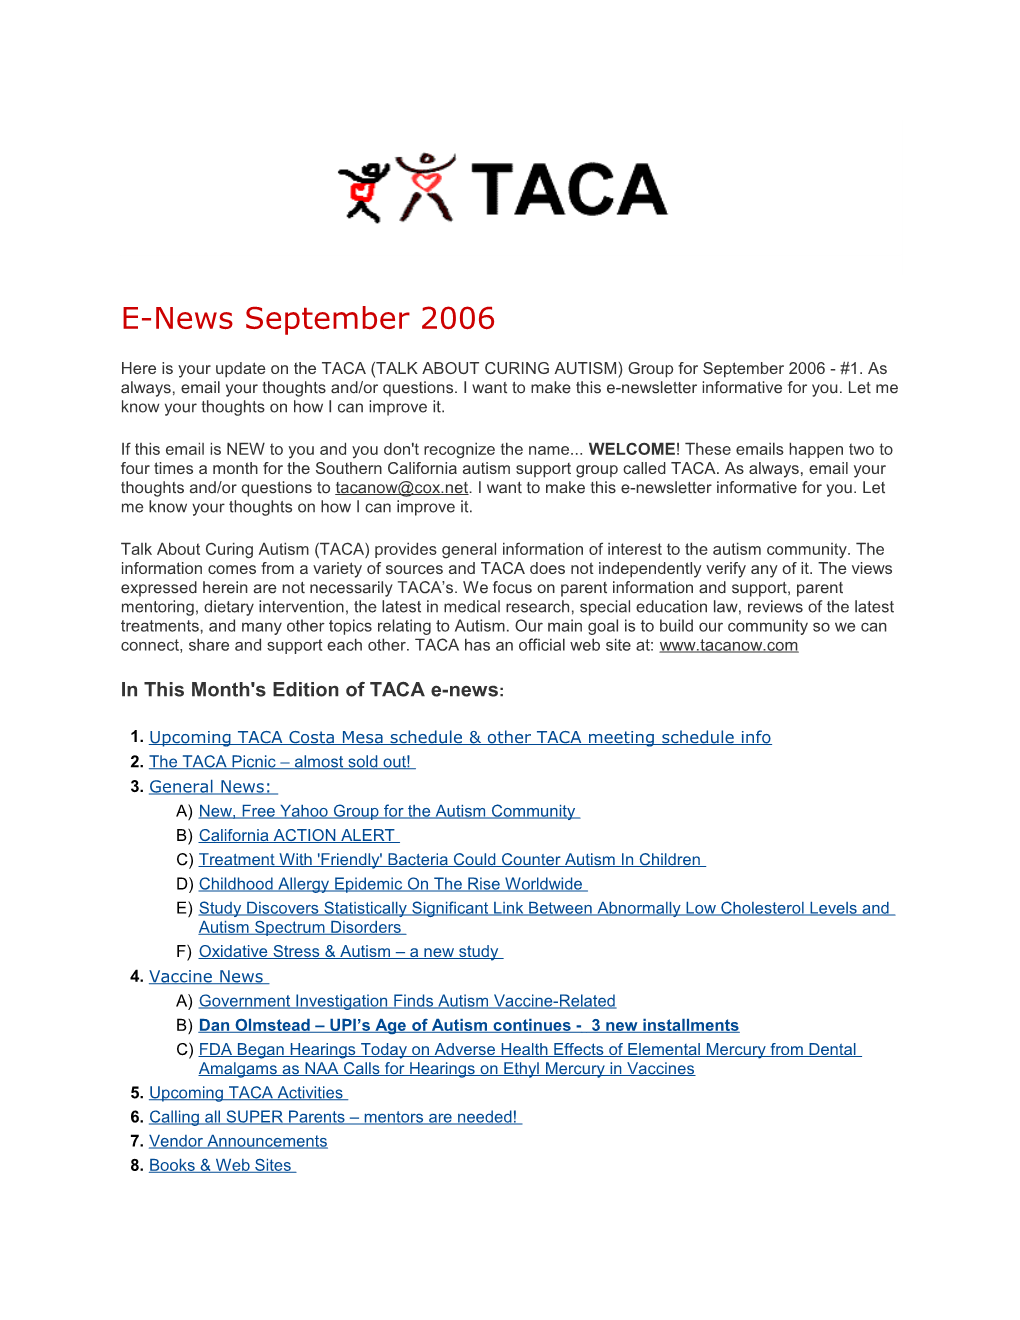 In This Month's Edition of TACA E-News s3